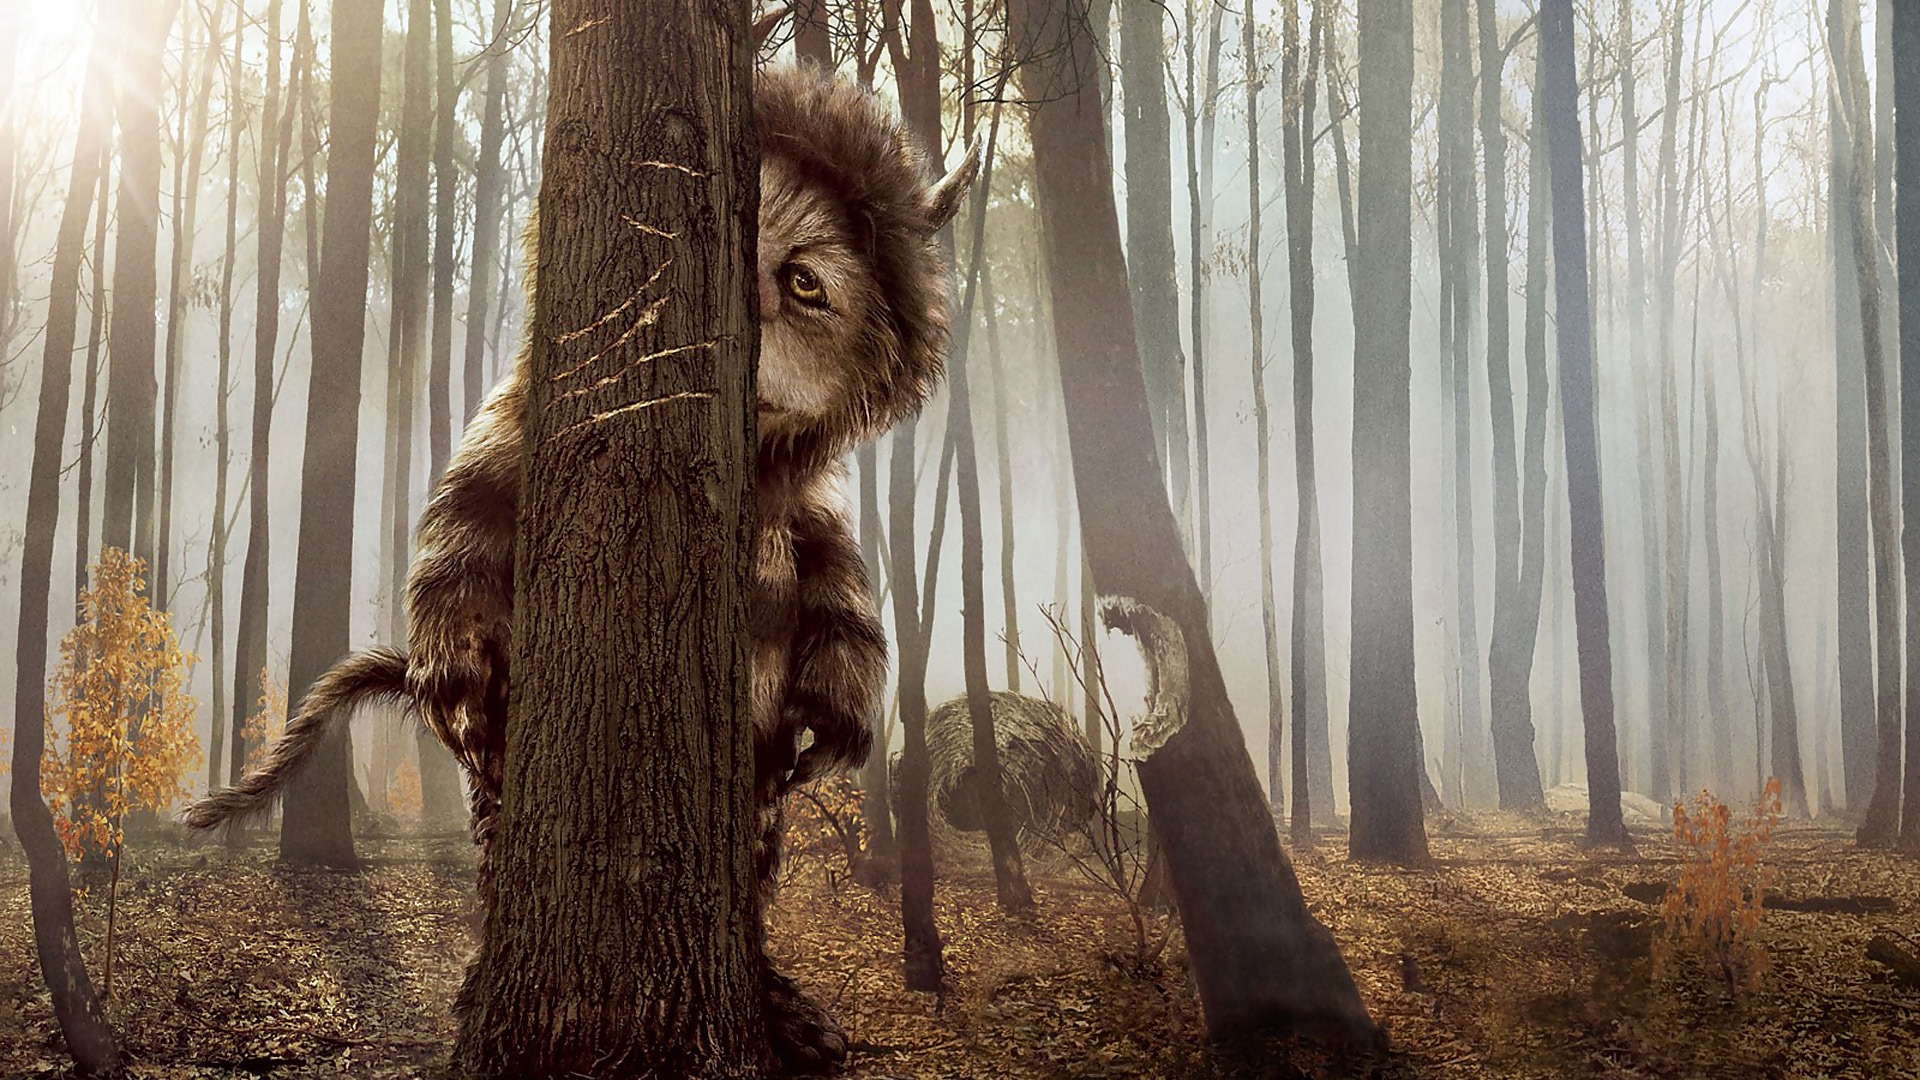 Where The Wild Things Are for 1920 x 1080 HDTV 1080p resolution